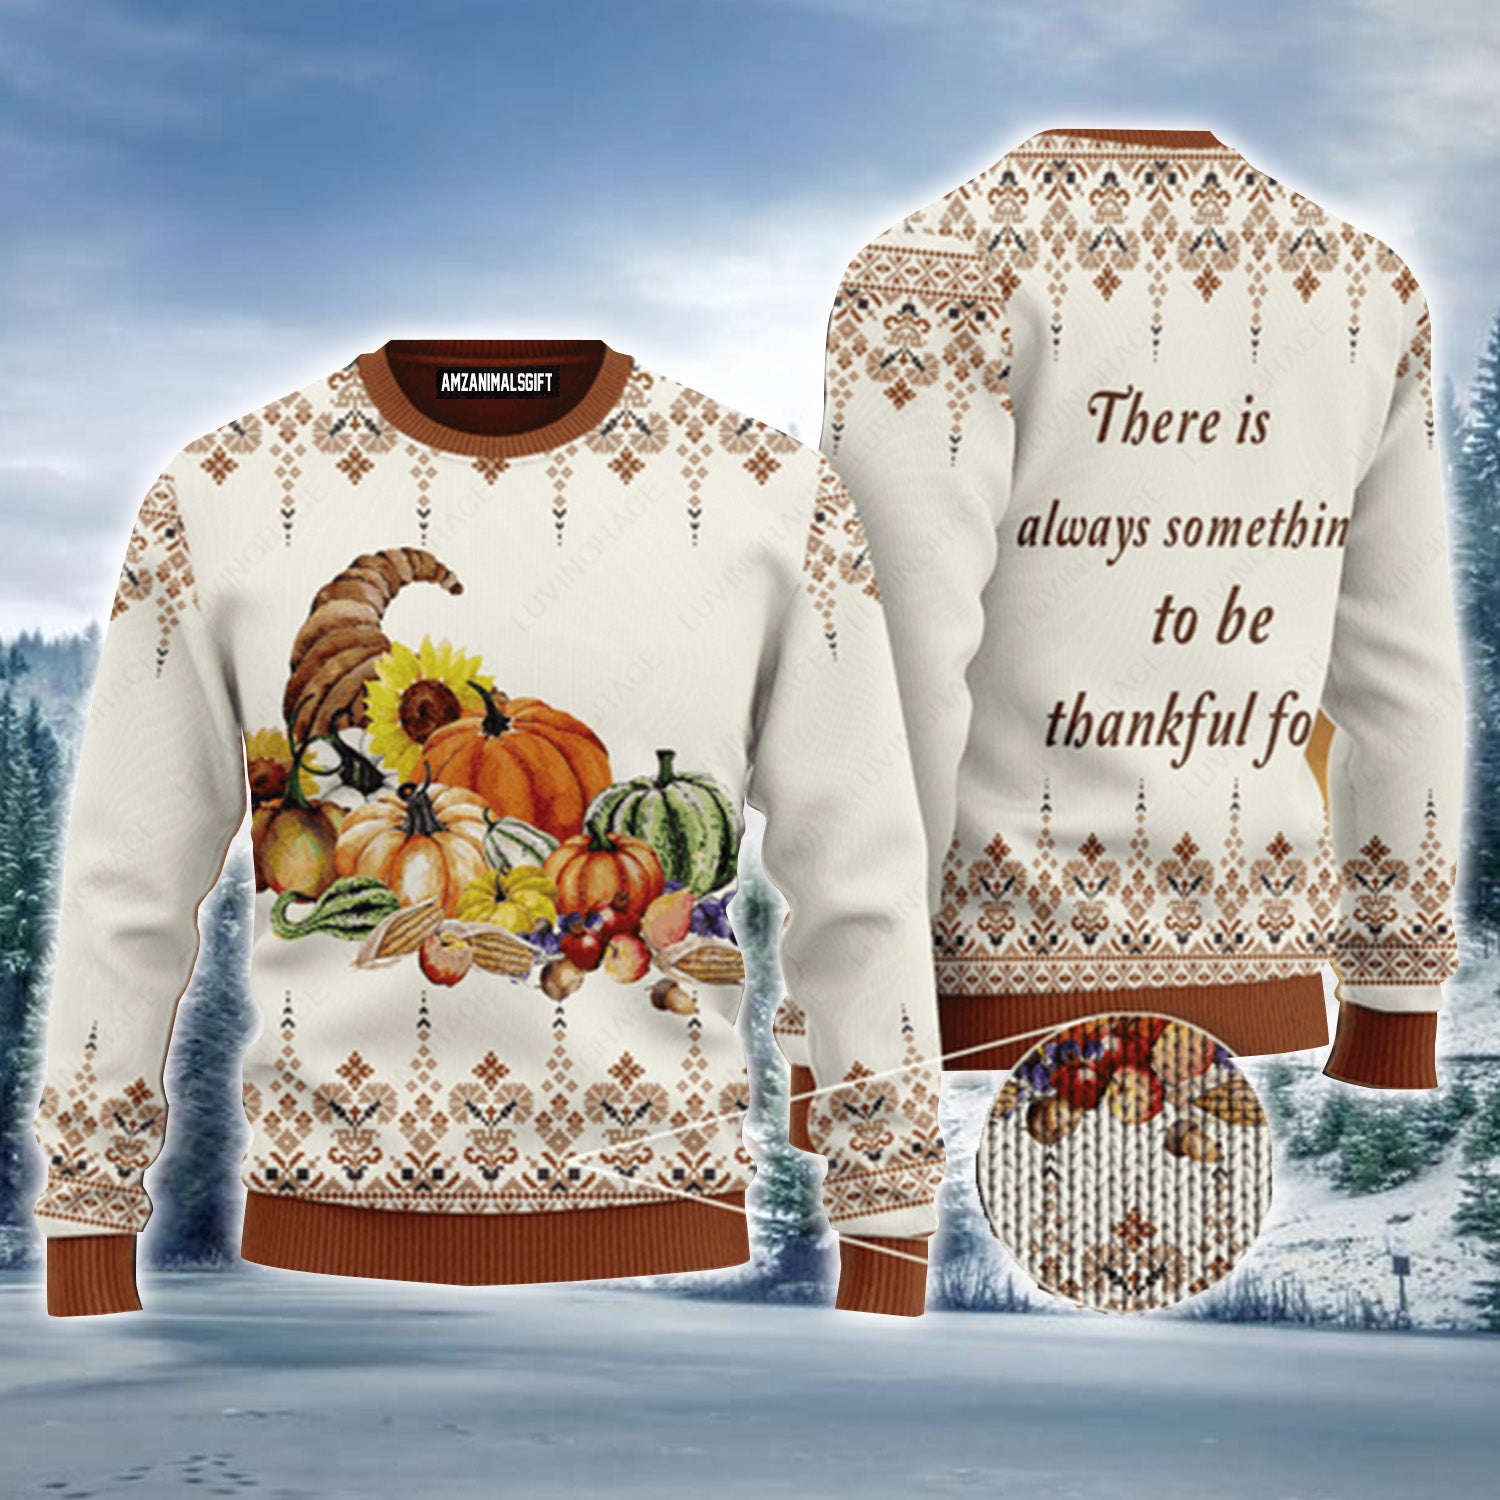 Thanksgiving Pumpkin Fruit There Is Always Urly Sweater, Thanksgiving Sweater For Men & Women - Perfect Gift For Thanksgiving, New Year, Winter